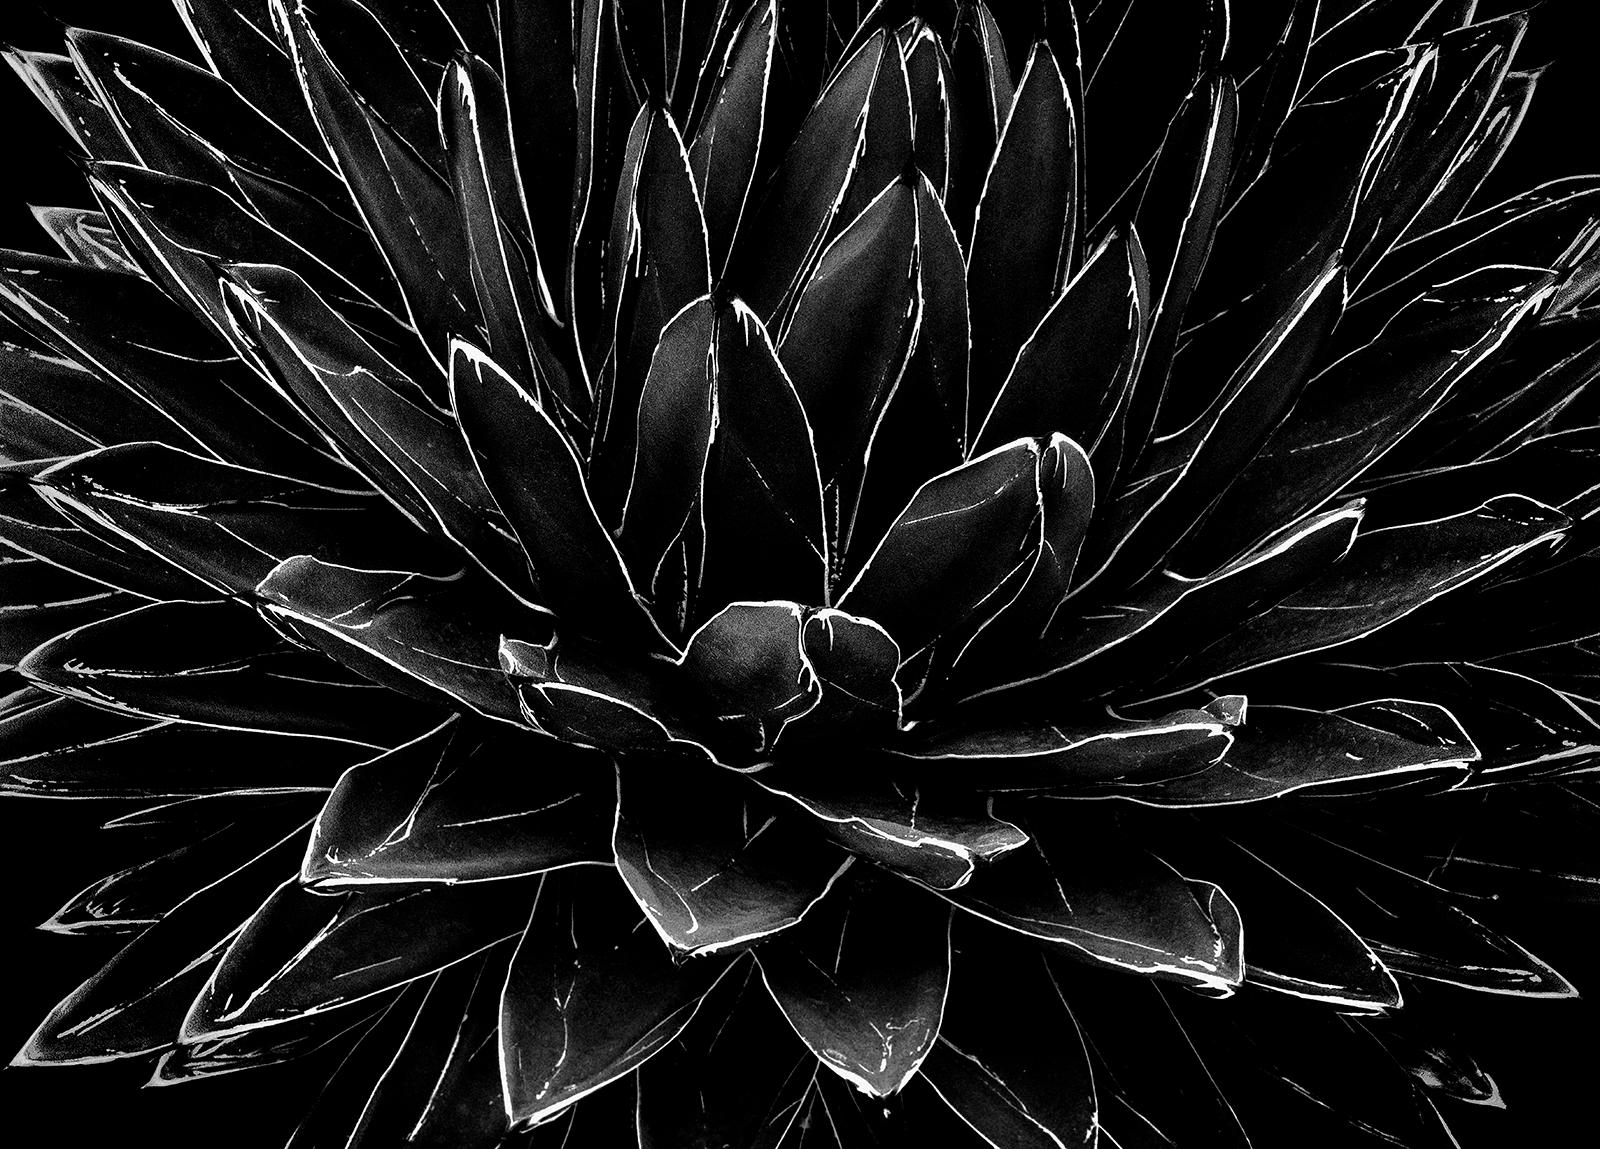 Cactus - Signed limited edition fine art print,Black and white photo,Analog